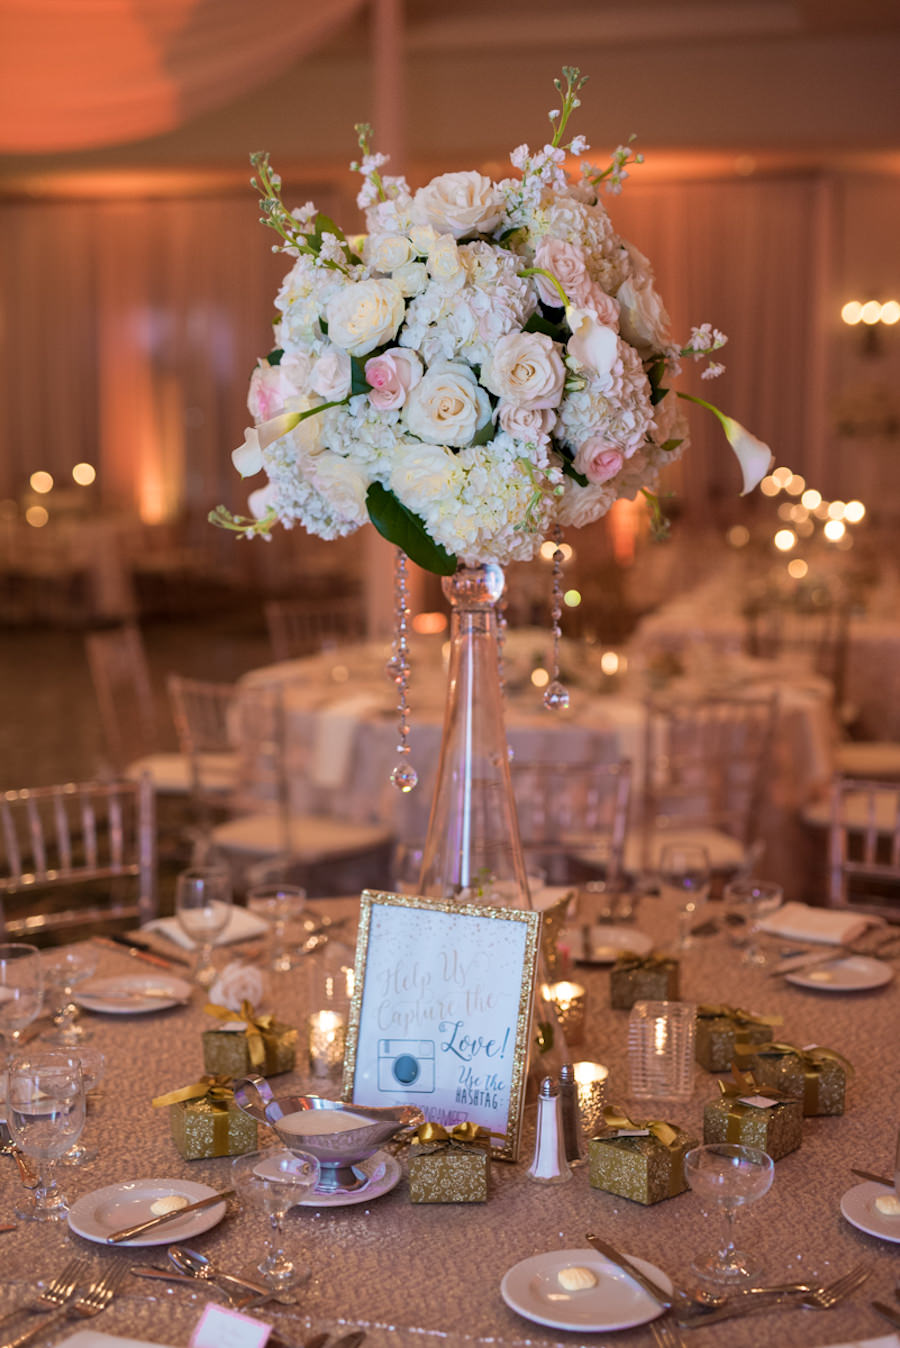 Tall White and Light Pink Rose and Hydrangea Wedding Centerpieces Flowers in Clear Vase on Glitter Specialty Linen | St. Petersburg Wedding Photographer Castorina Photography